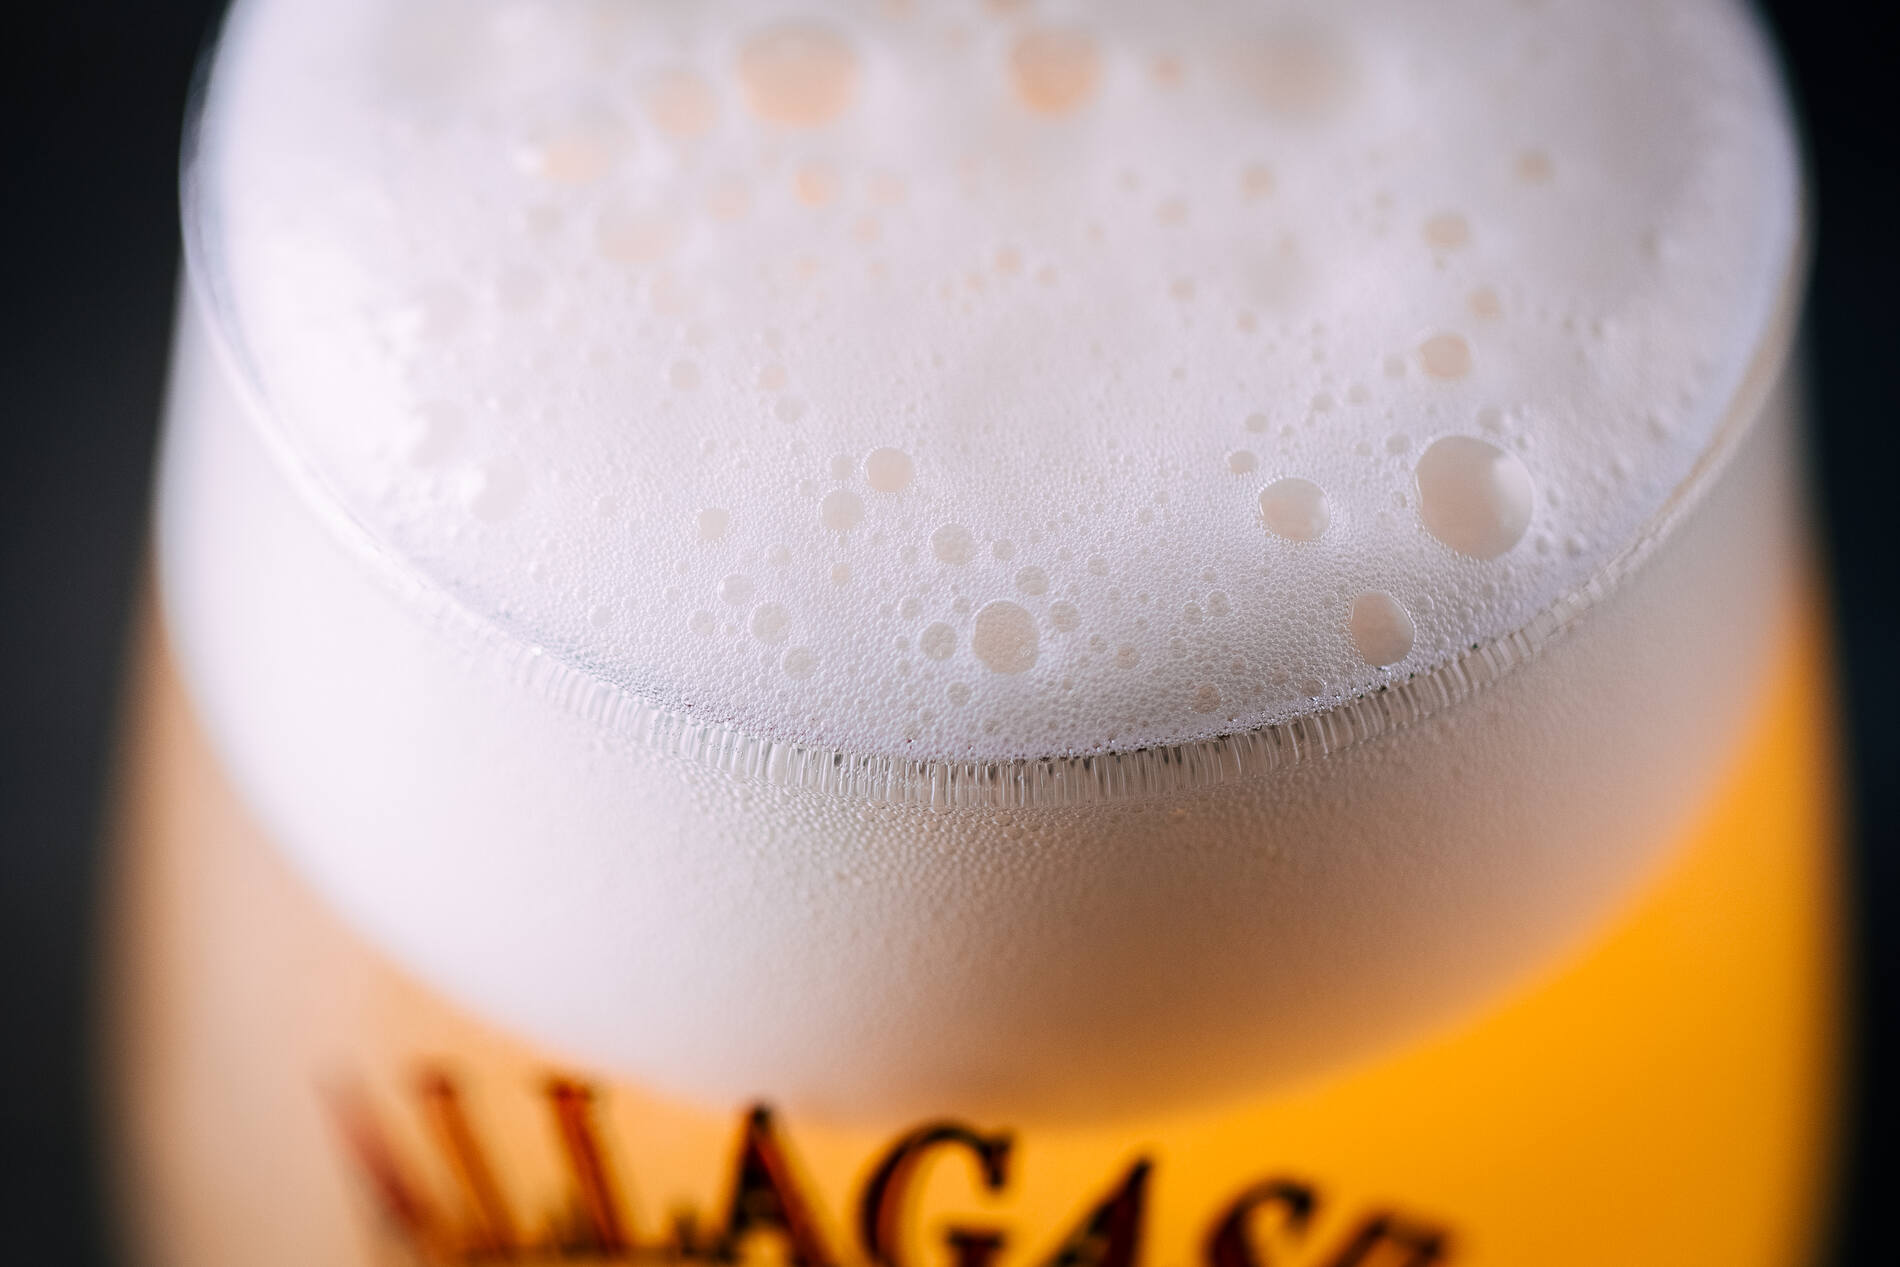 Flip, Swirl, Sip – How to pour a perfect Allagash White